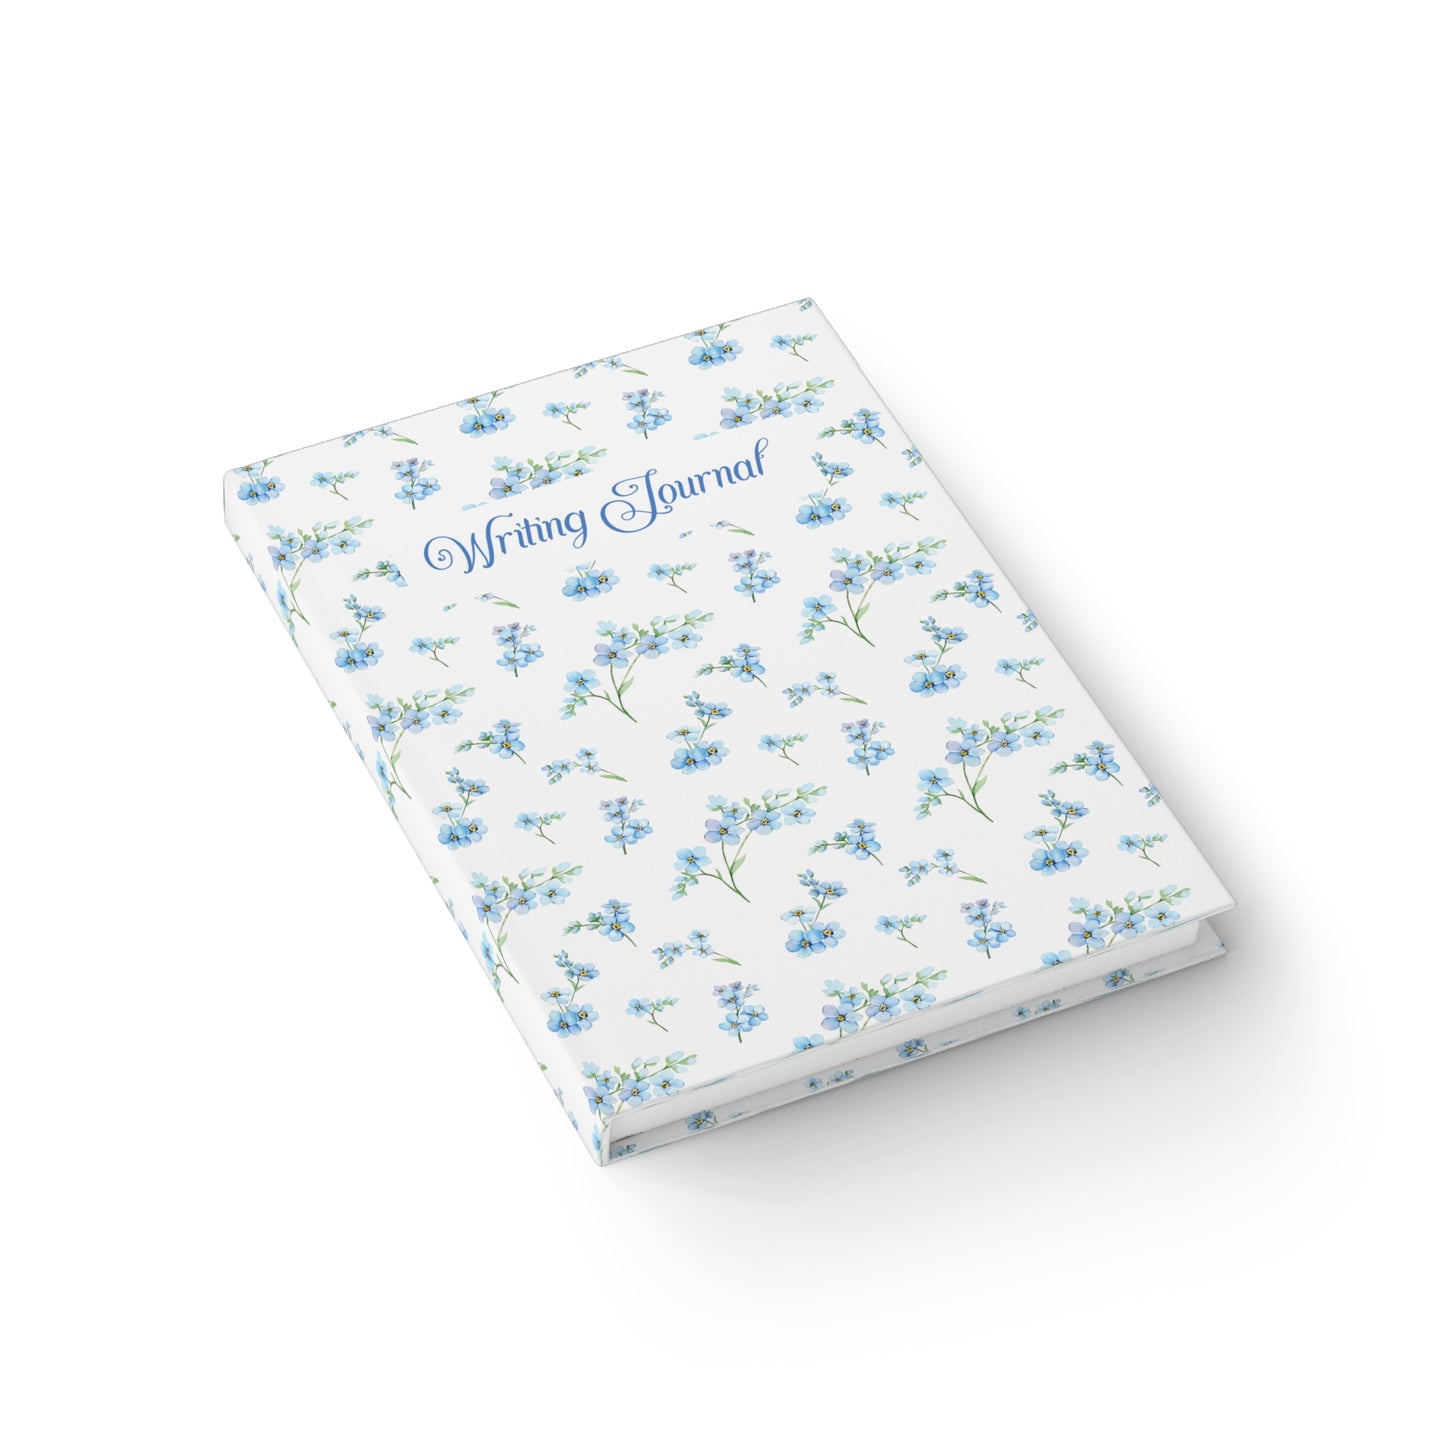 Forget-Me-Not Writing Journal - Ruled Line